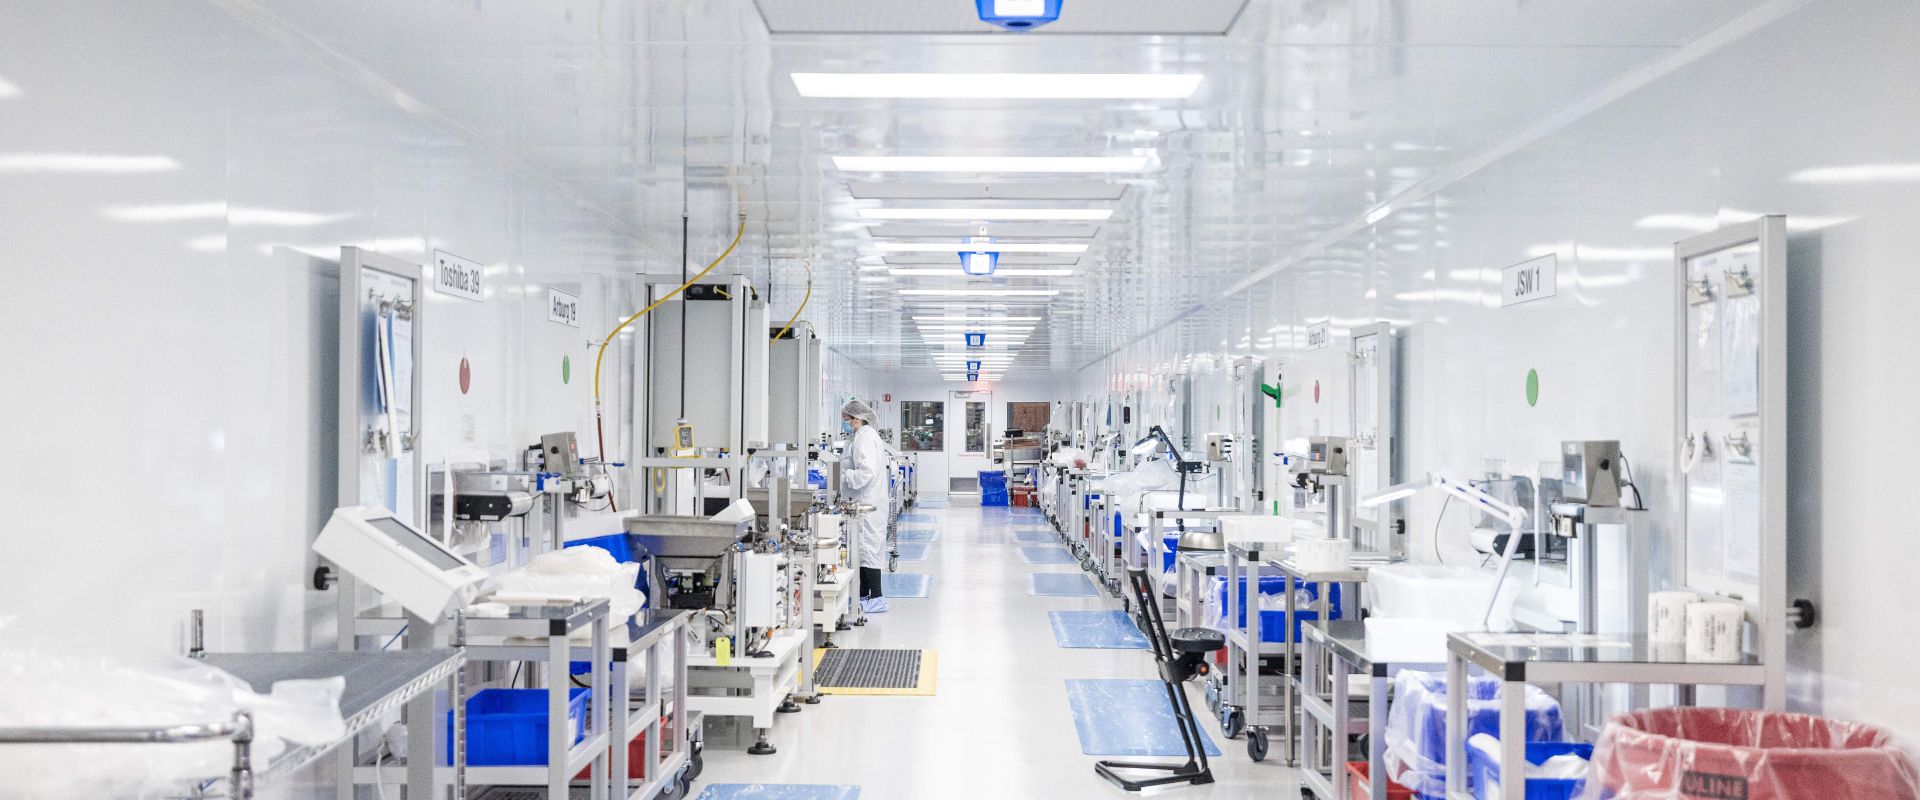 Medical Device Manufacturing Clean Room